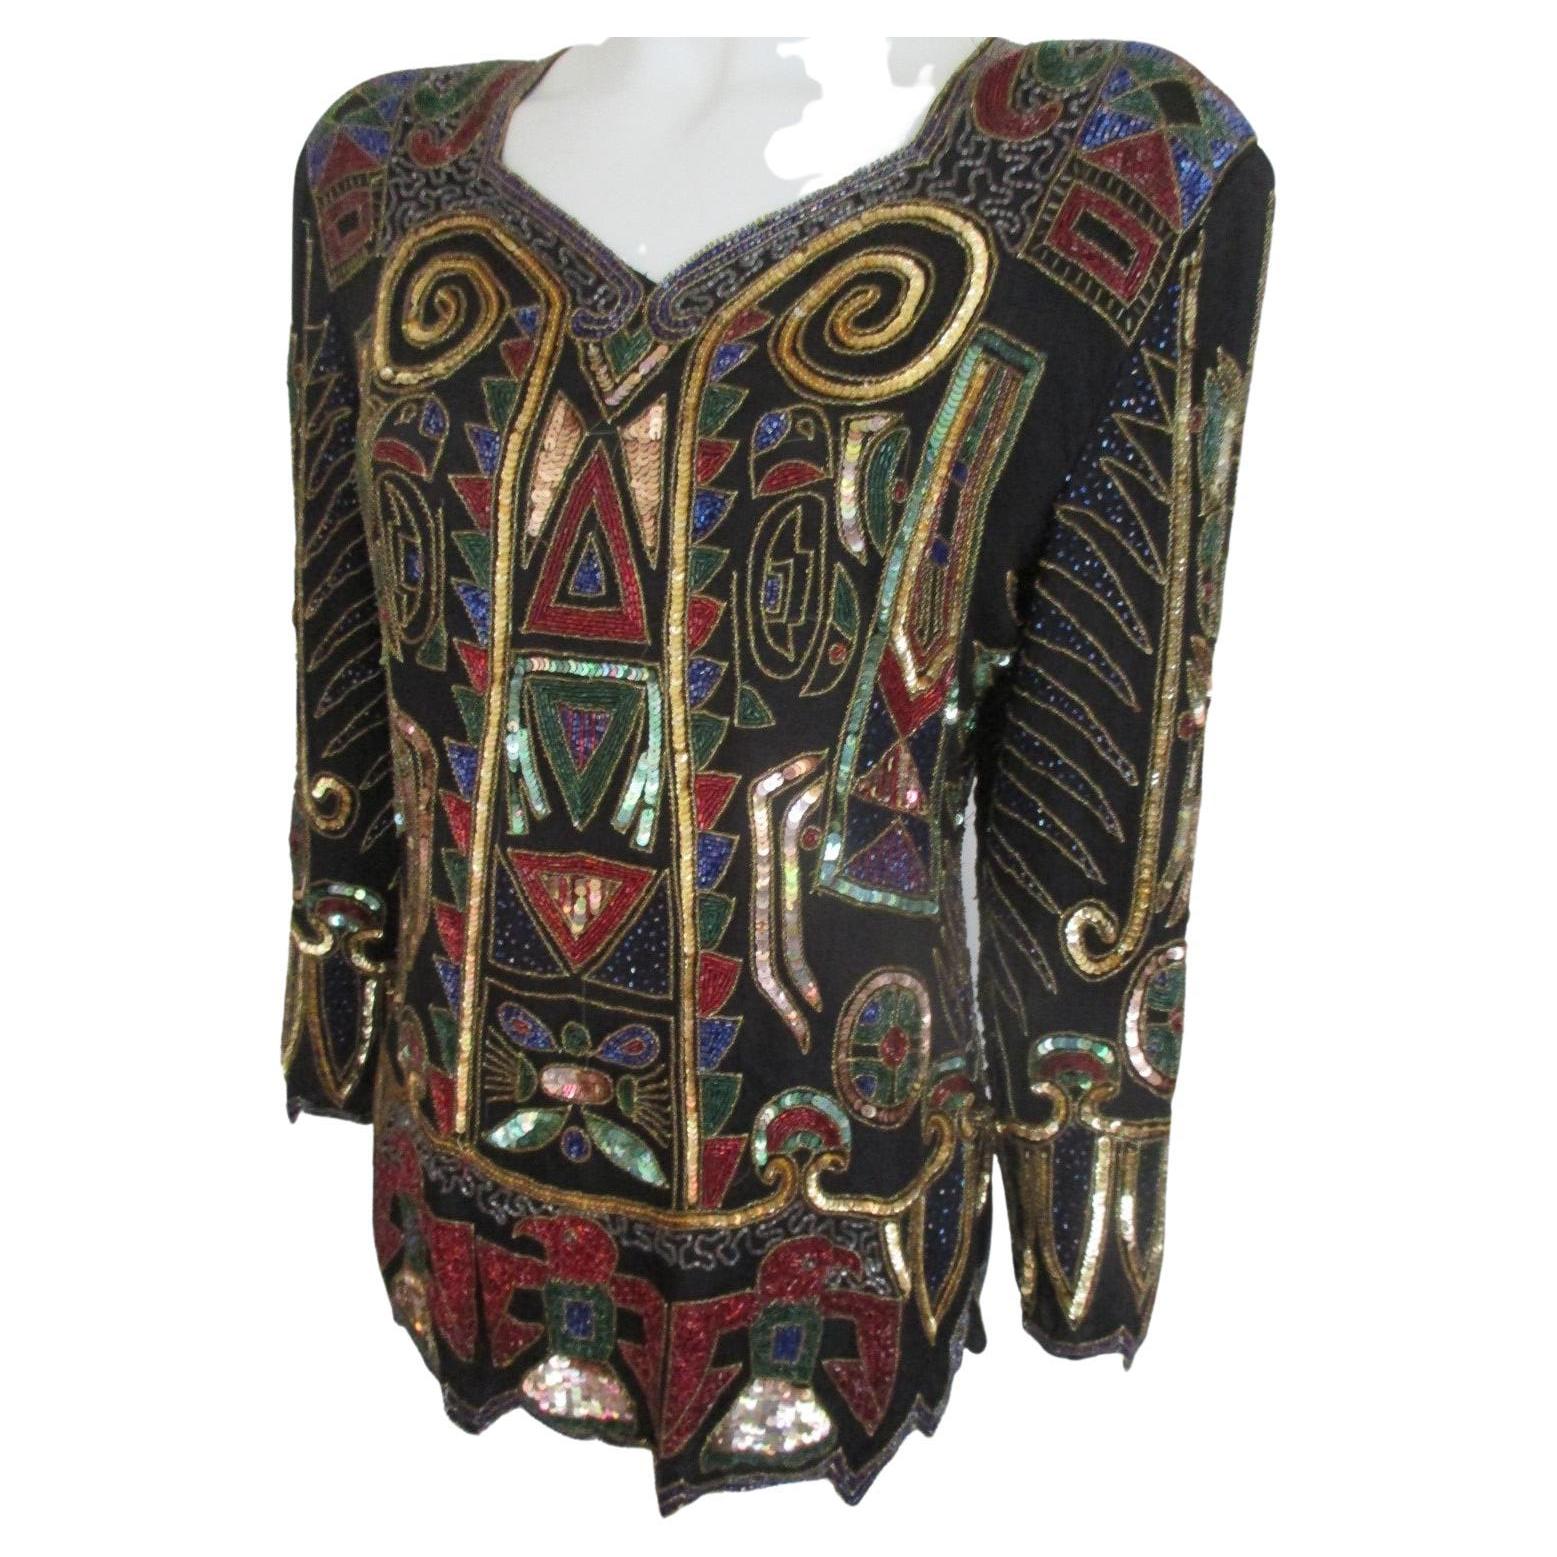 We offer more special vintage sequins items, view our frontstore

Details:
Black top embroidered with beads and color seguin's with goldtone in art deco style
Lined with 2 shoulderpads, which can be removed
Zipper at the back
Pre owned
Size about